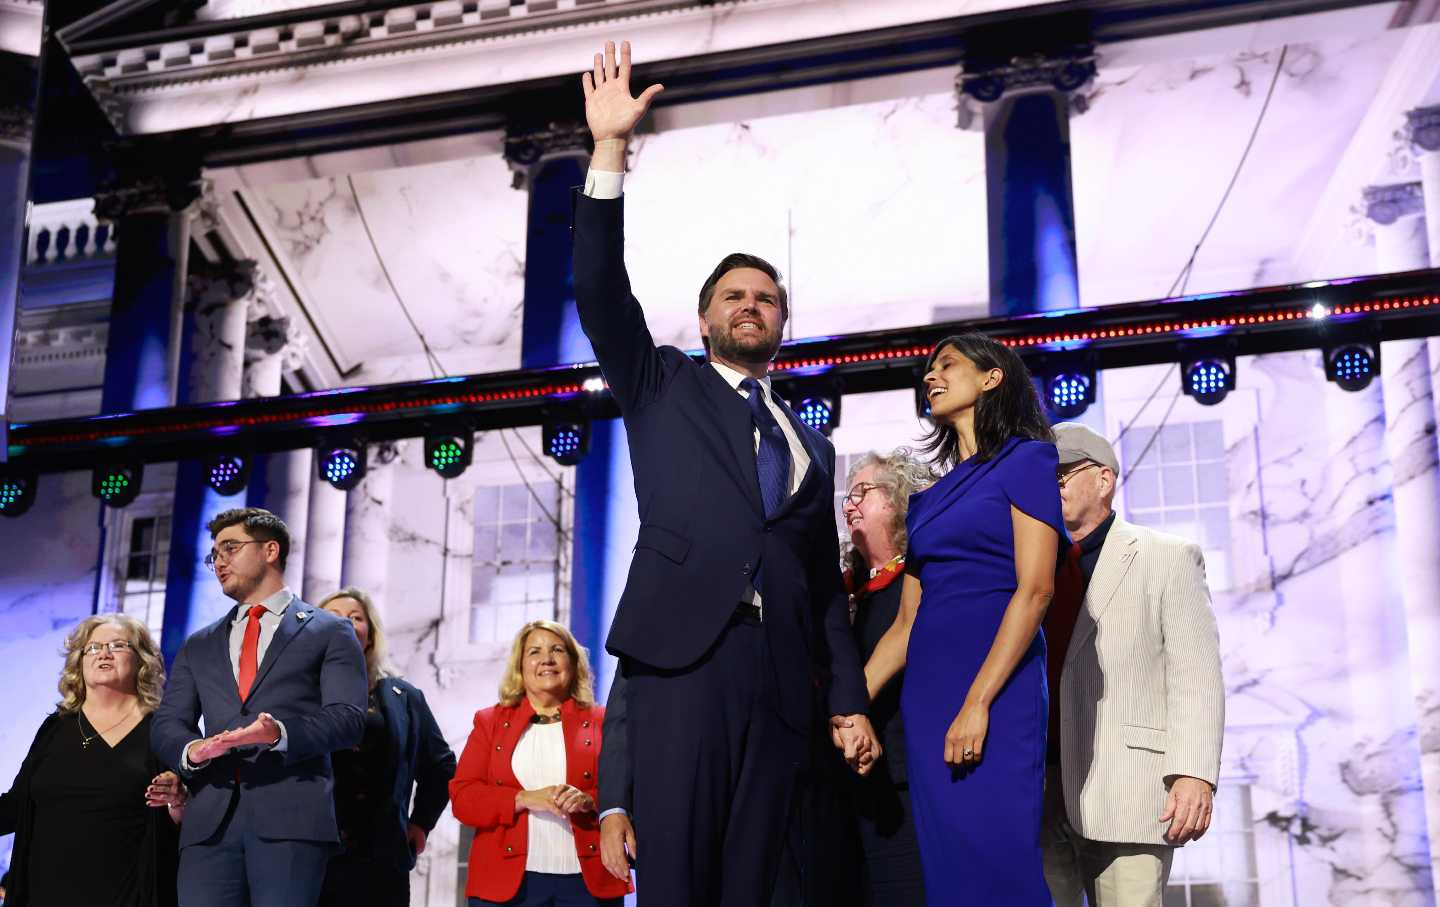 J.D. Vance, his wife, Usha (in the blue dress), and his family on stage in Milwaukee. His mother Bev, a former addict whom Vance described last night as “10 years clean and sober,” is on the left.